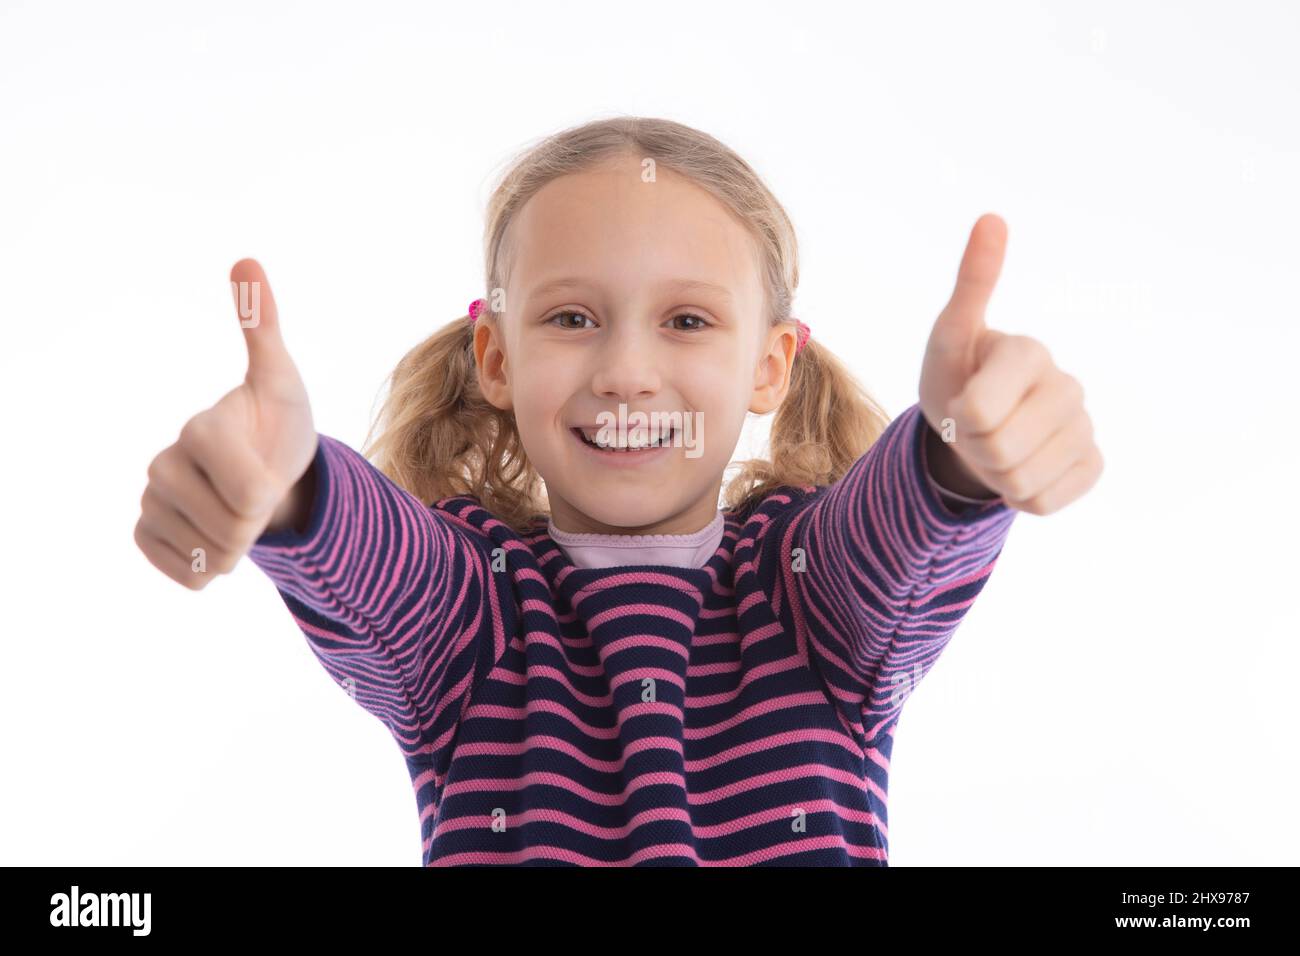 Successful young girl looking into camera for a thumbs up. Isolated studio shot with copy space. Stock Photo